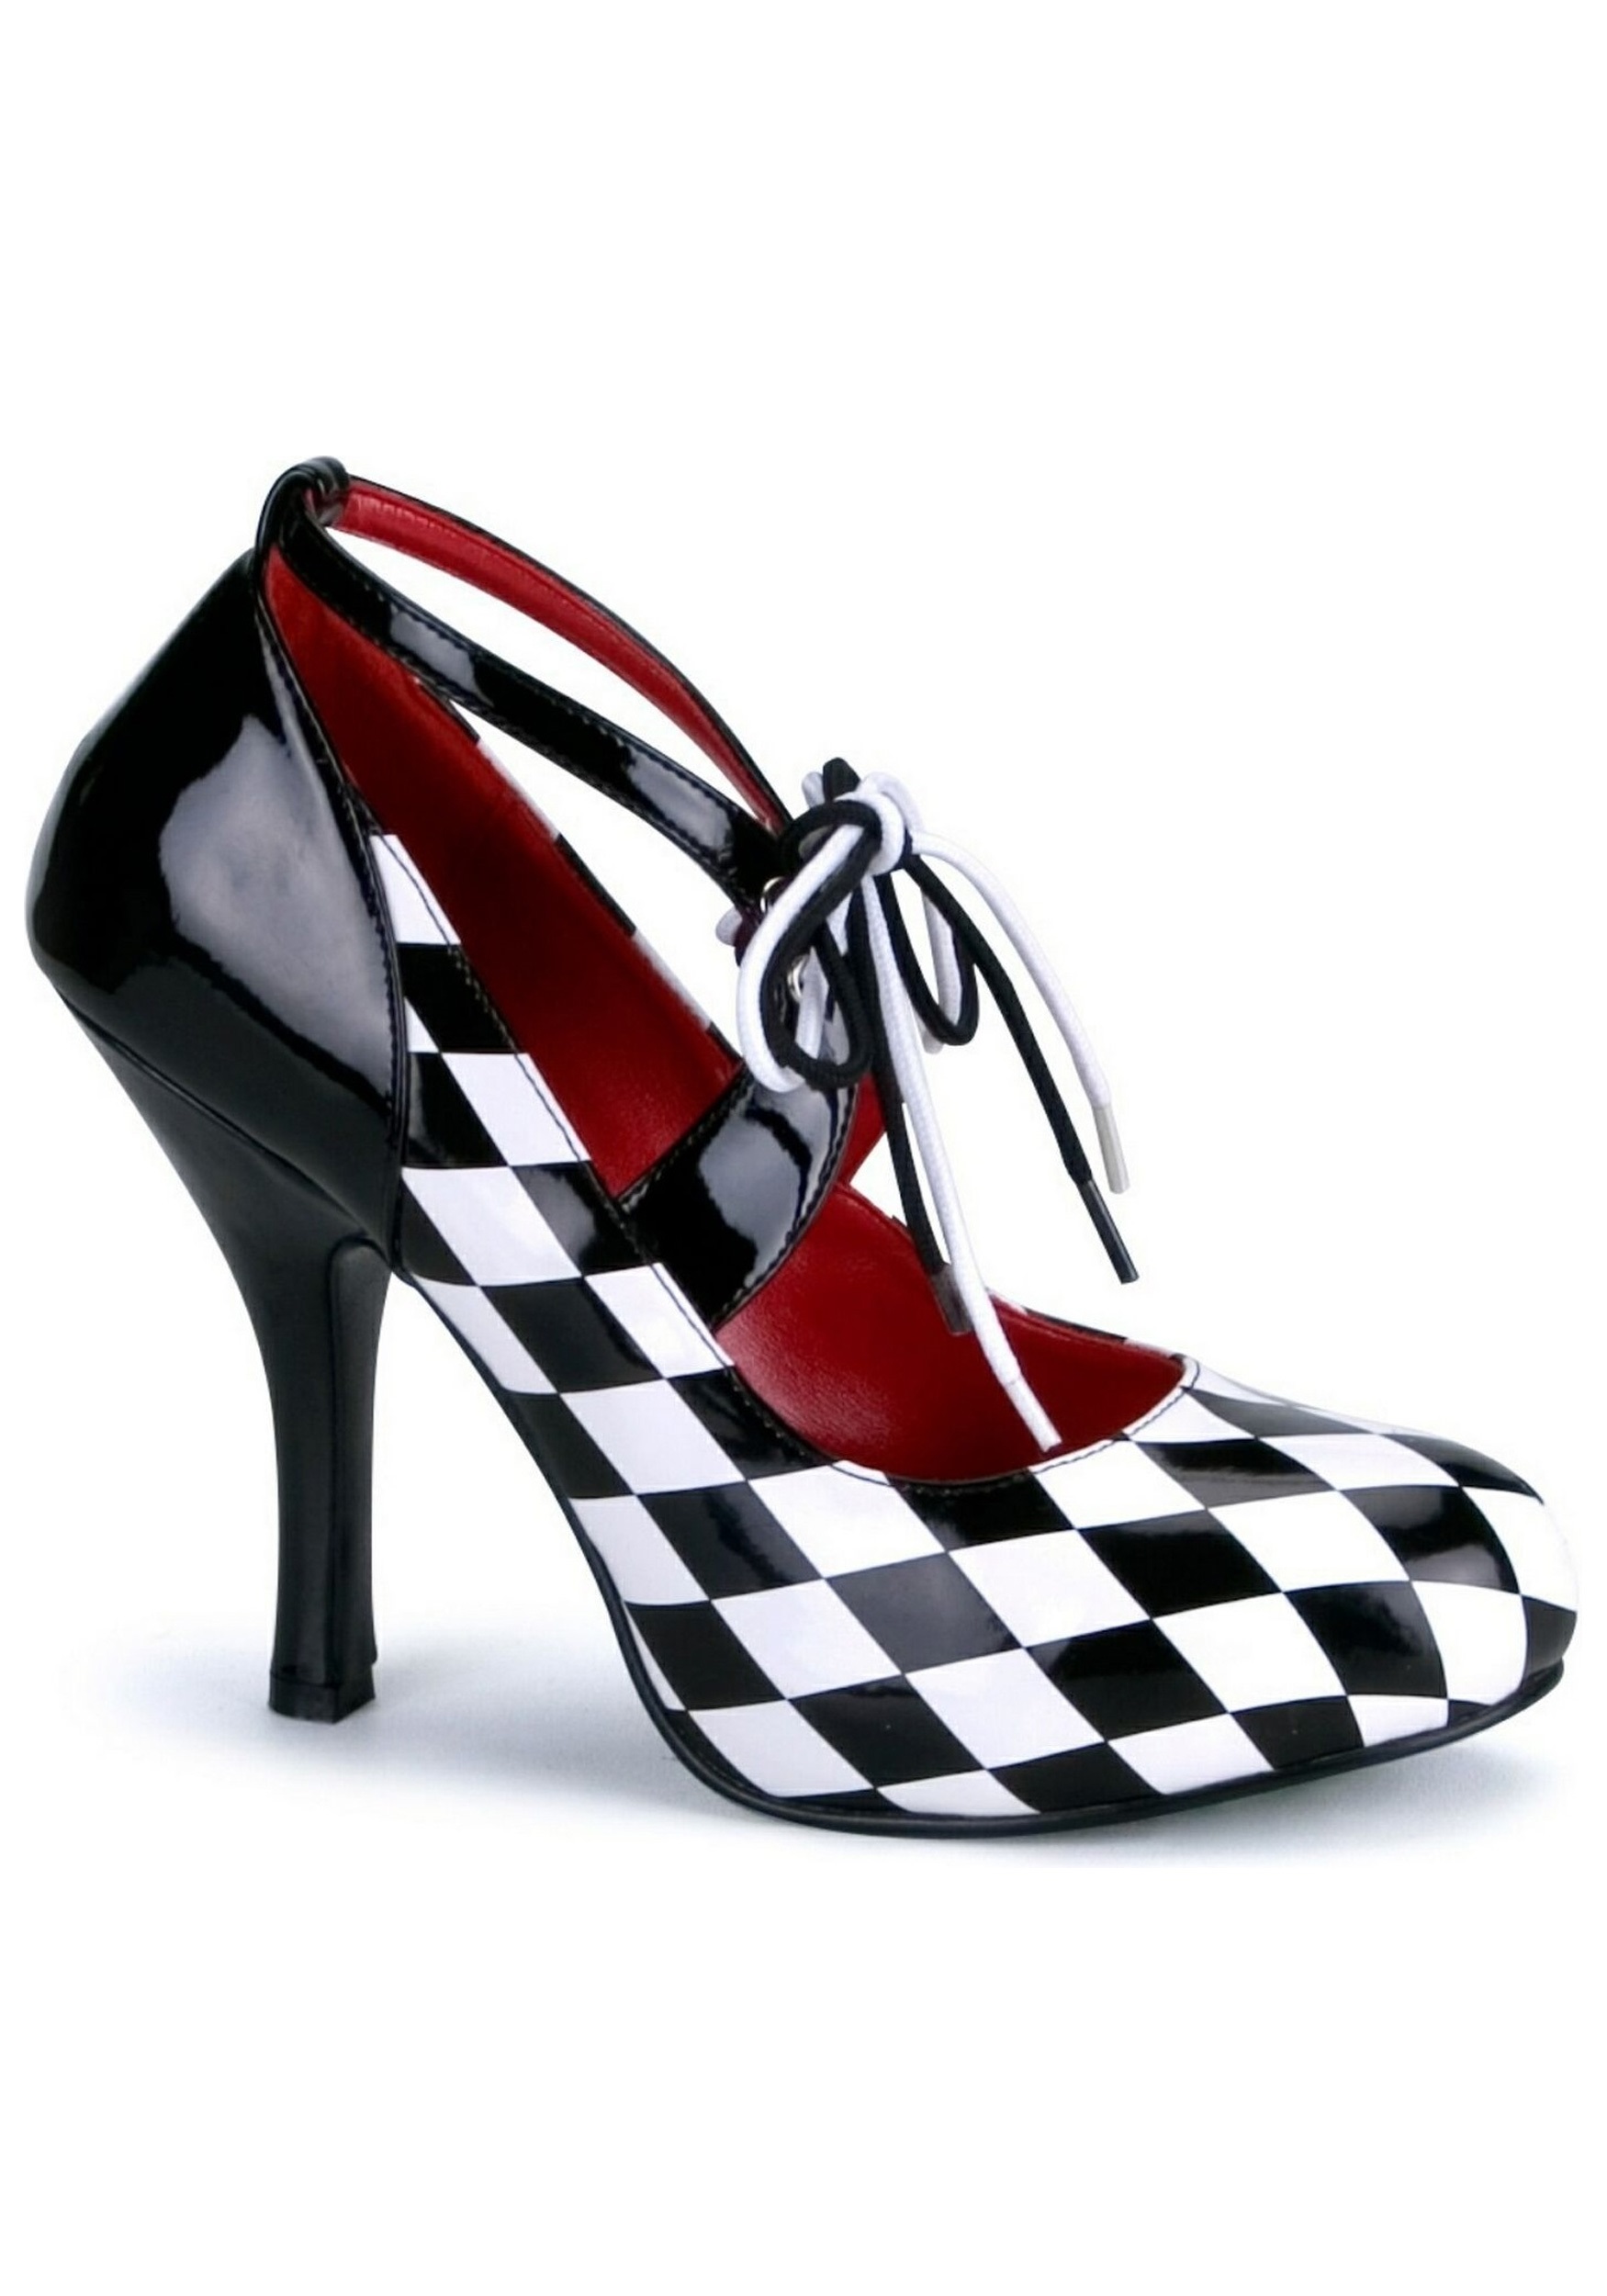 Harlequin Shoes for Women